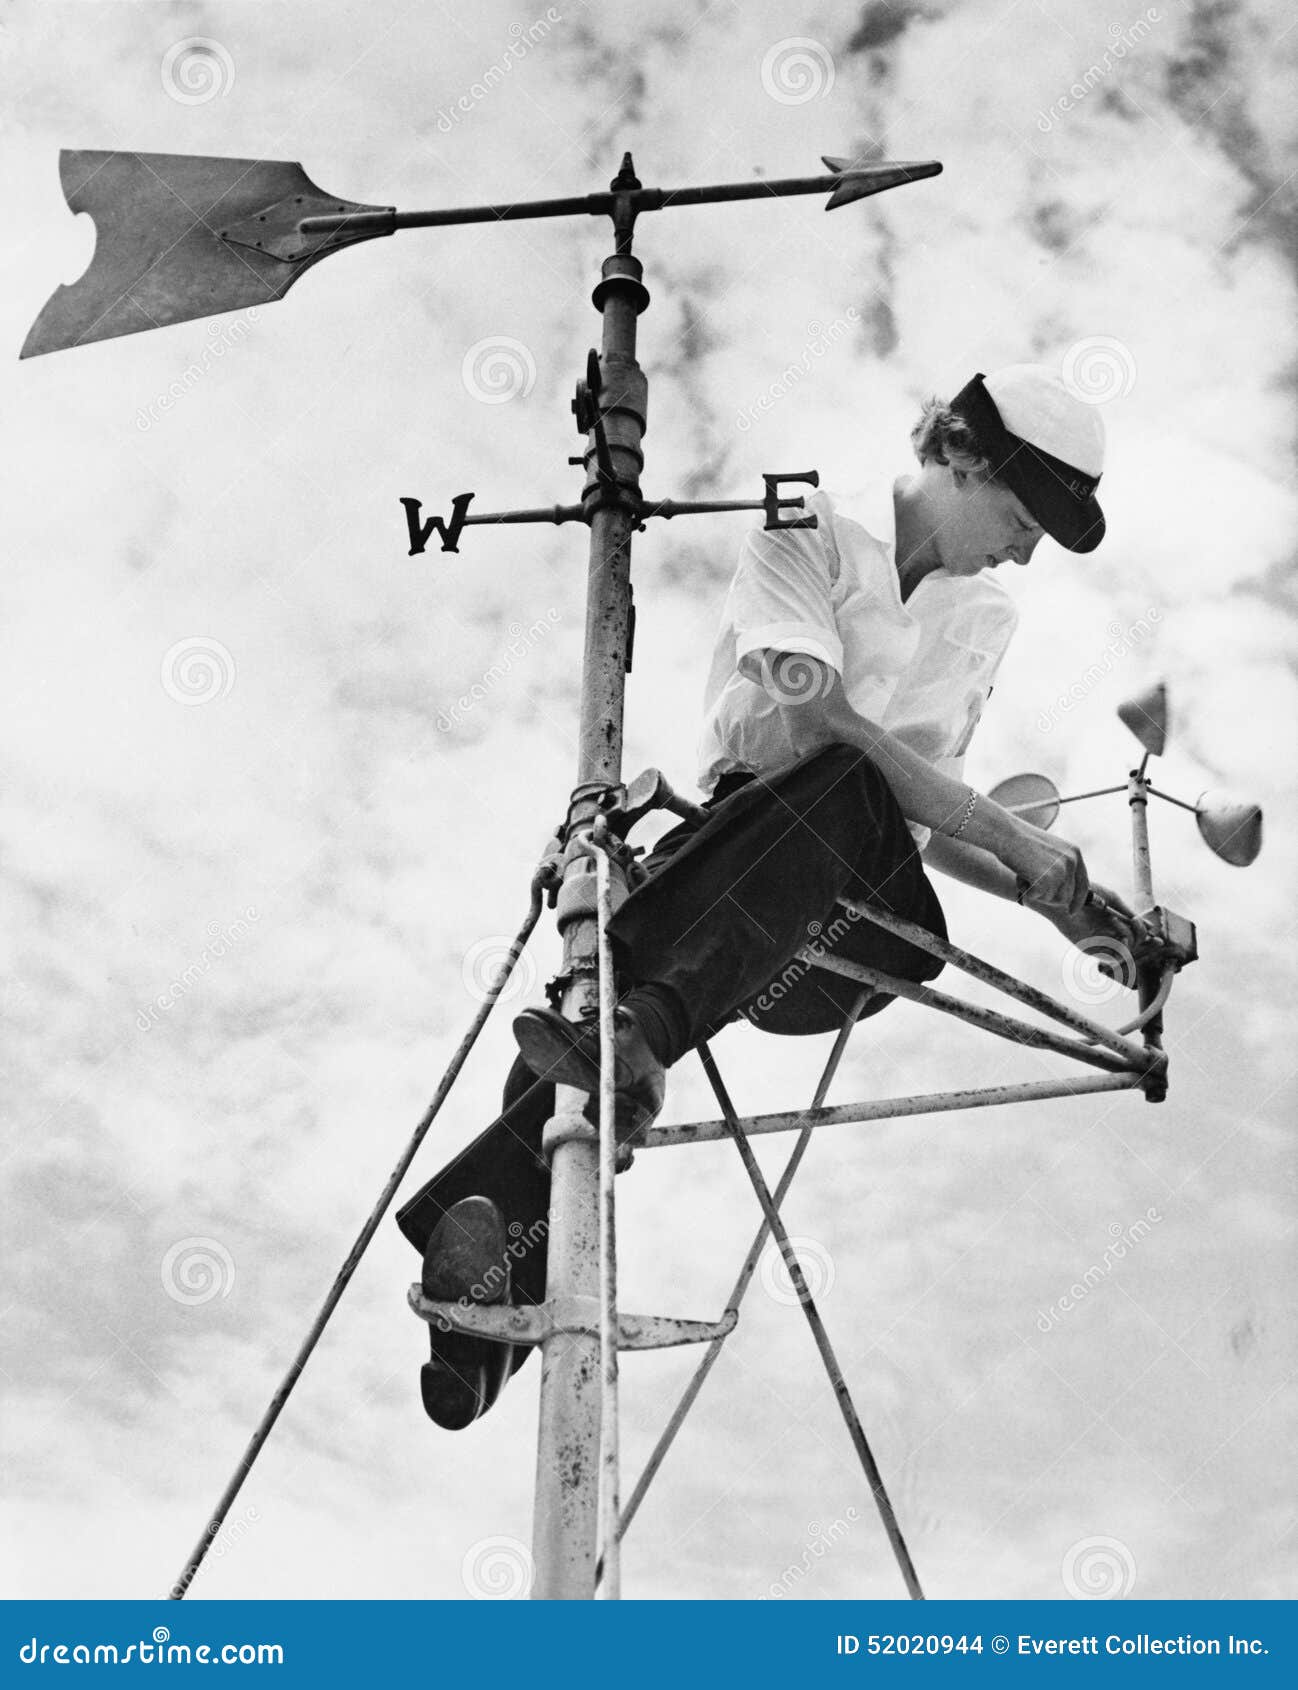 low angle view of a young woman mending a weather vane